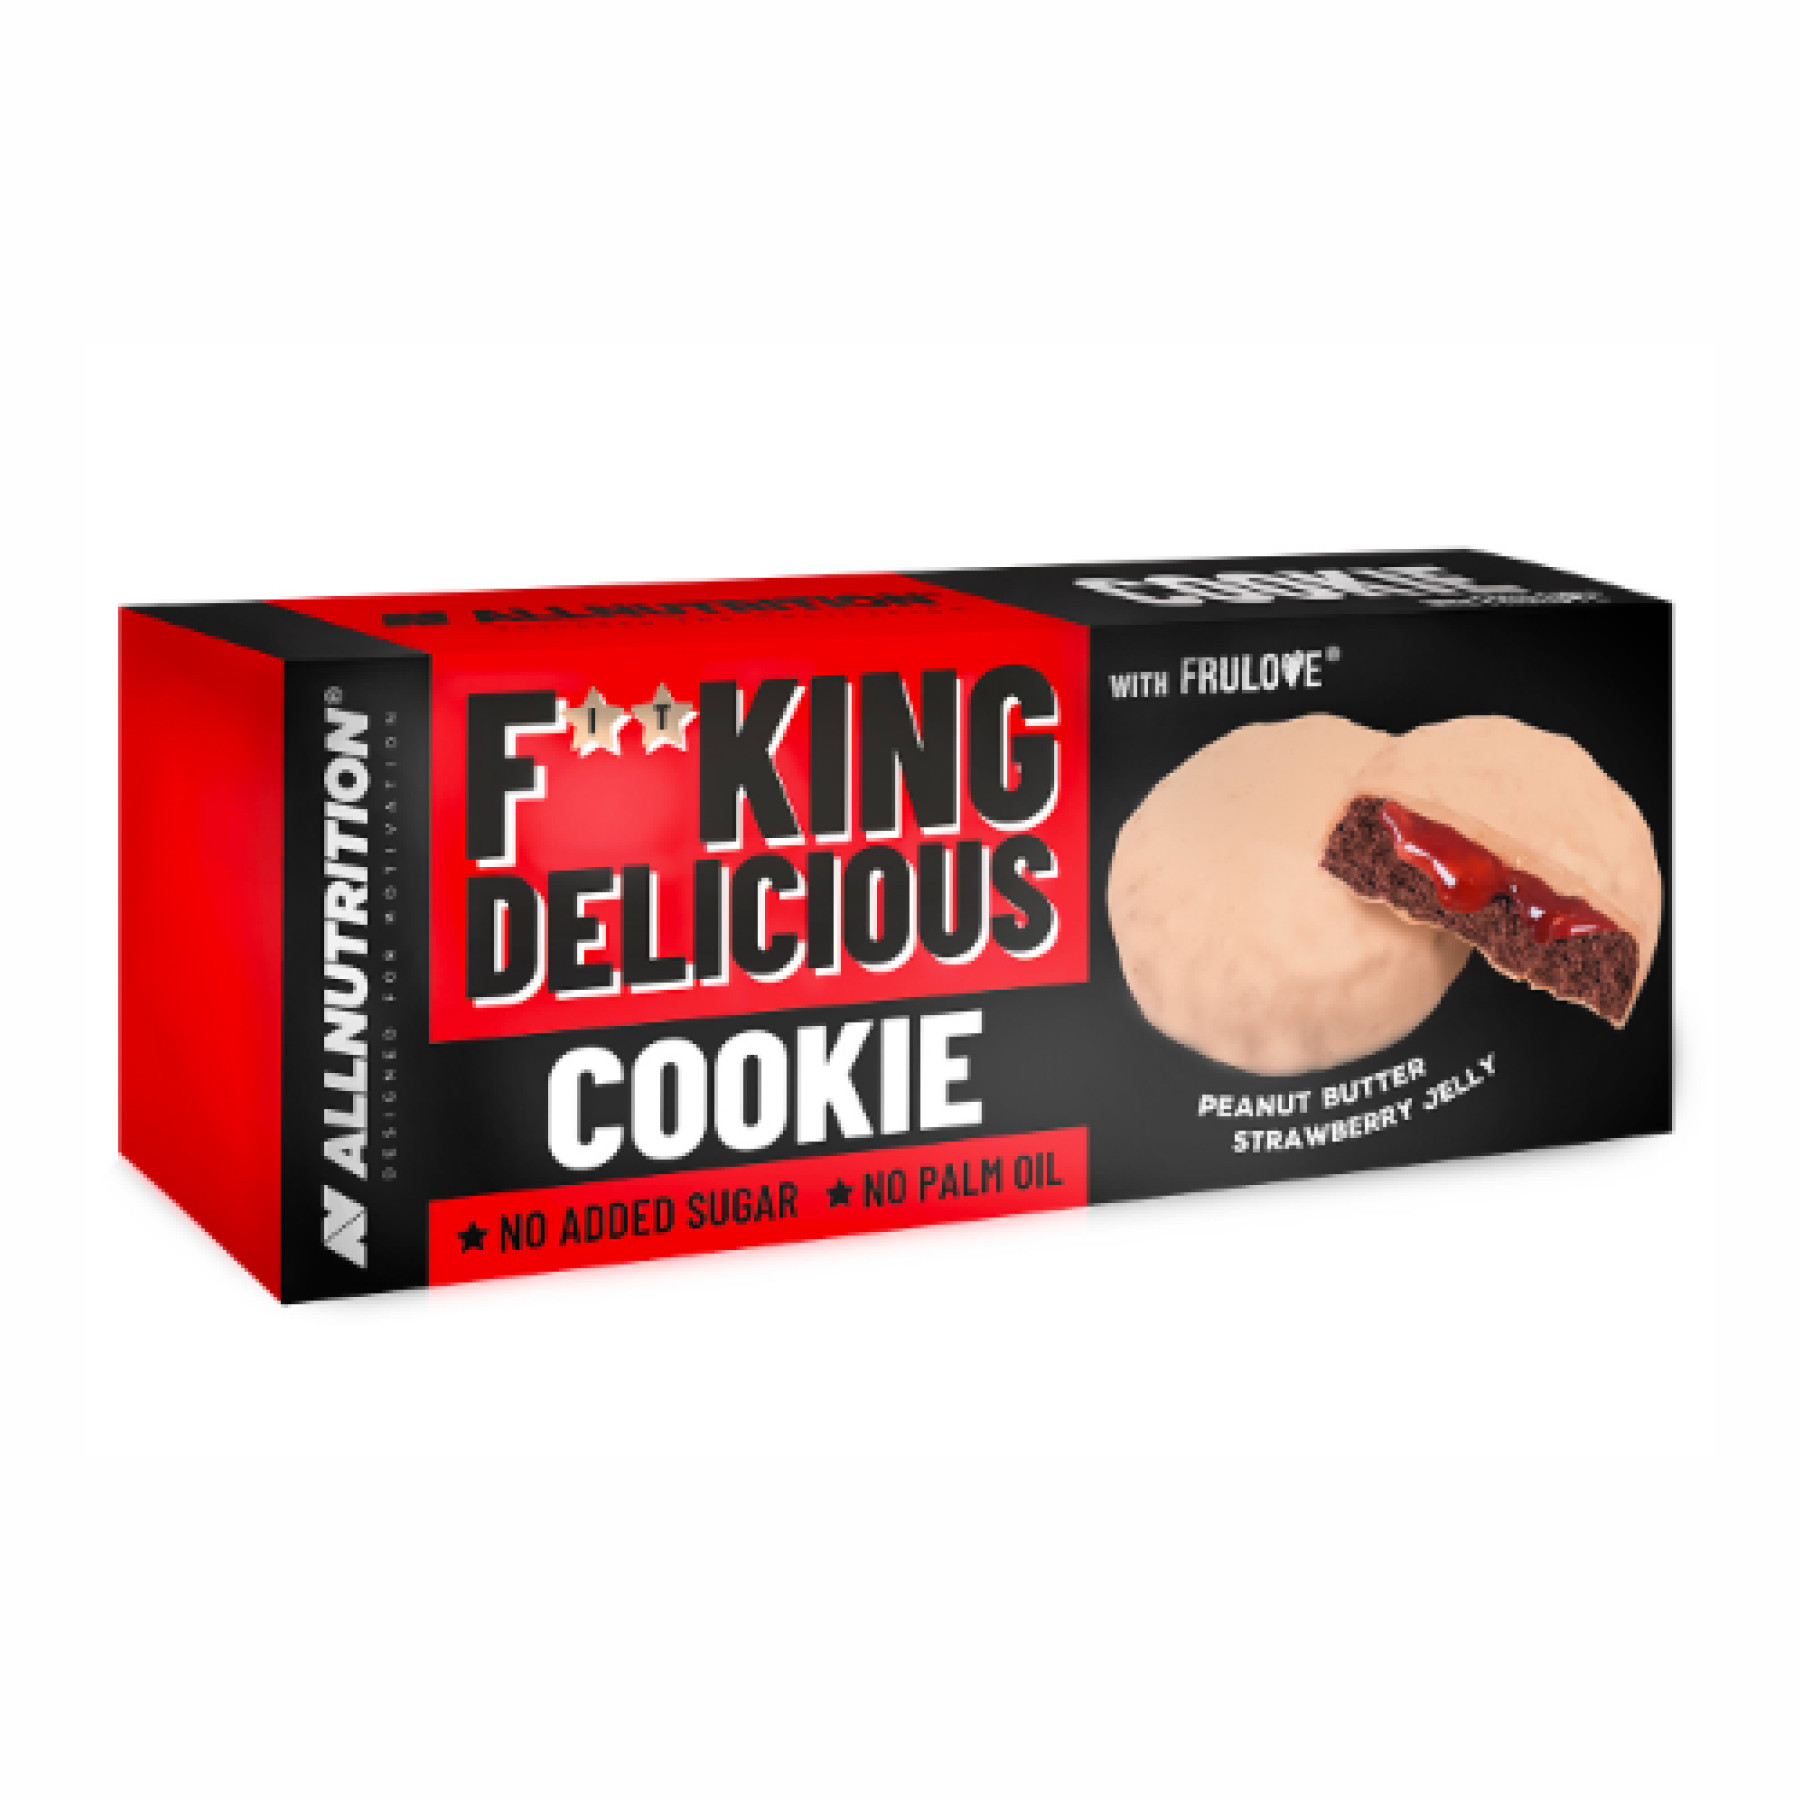 Батончик Fitking Delicious Cookie -128g Peanut Butter Strawberry Jelly 2022-10-0576